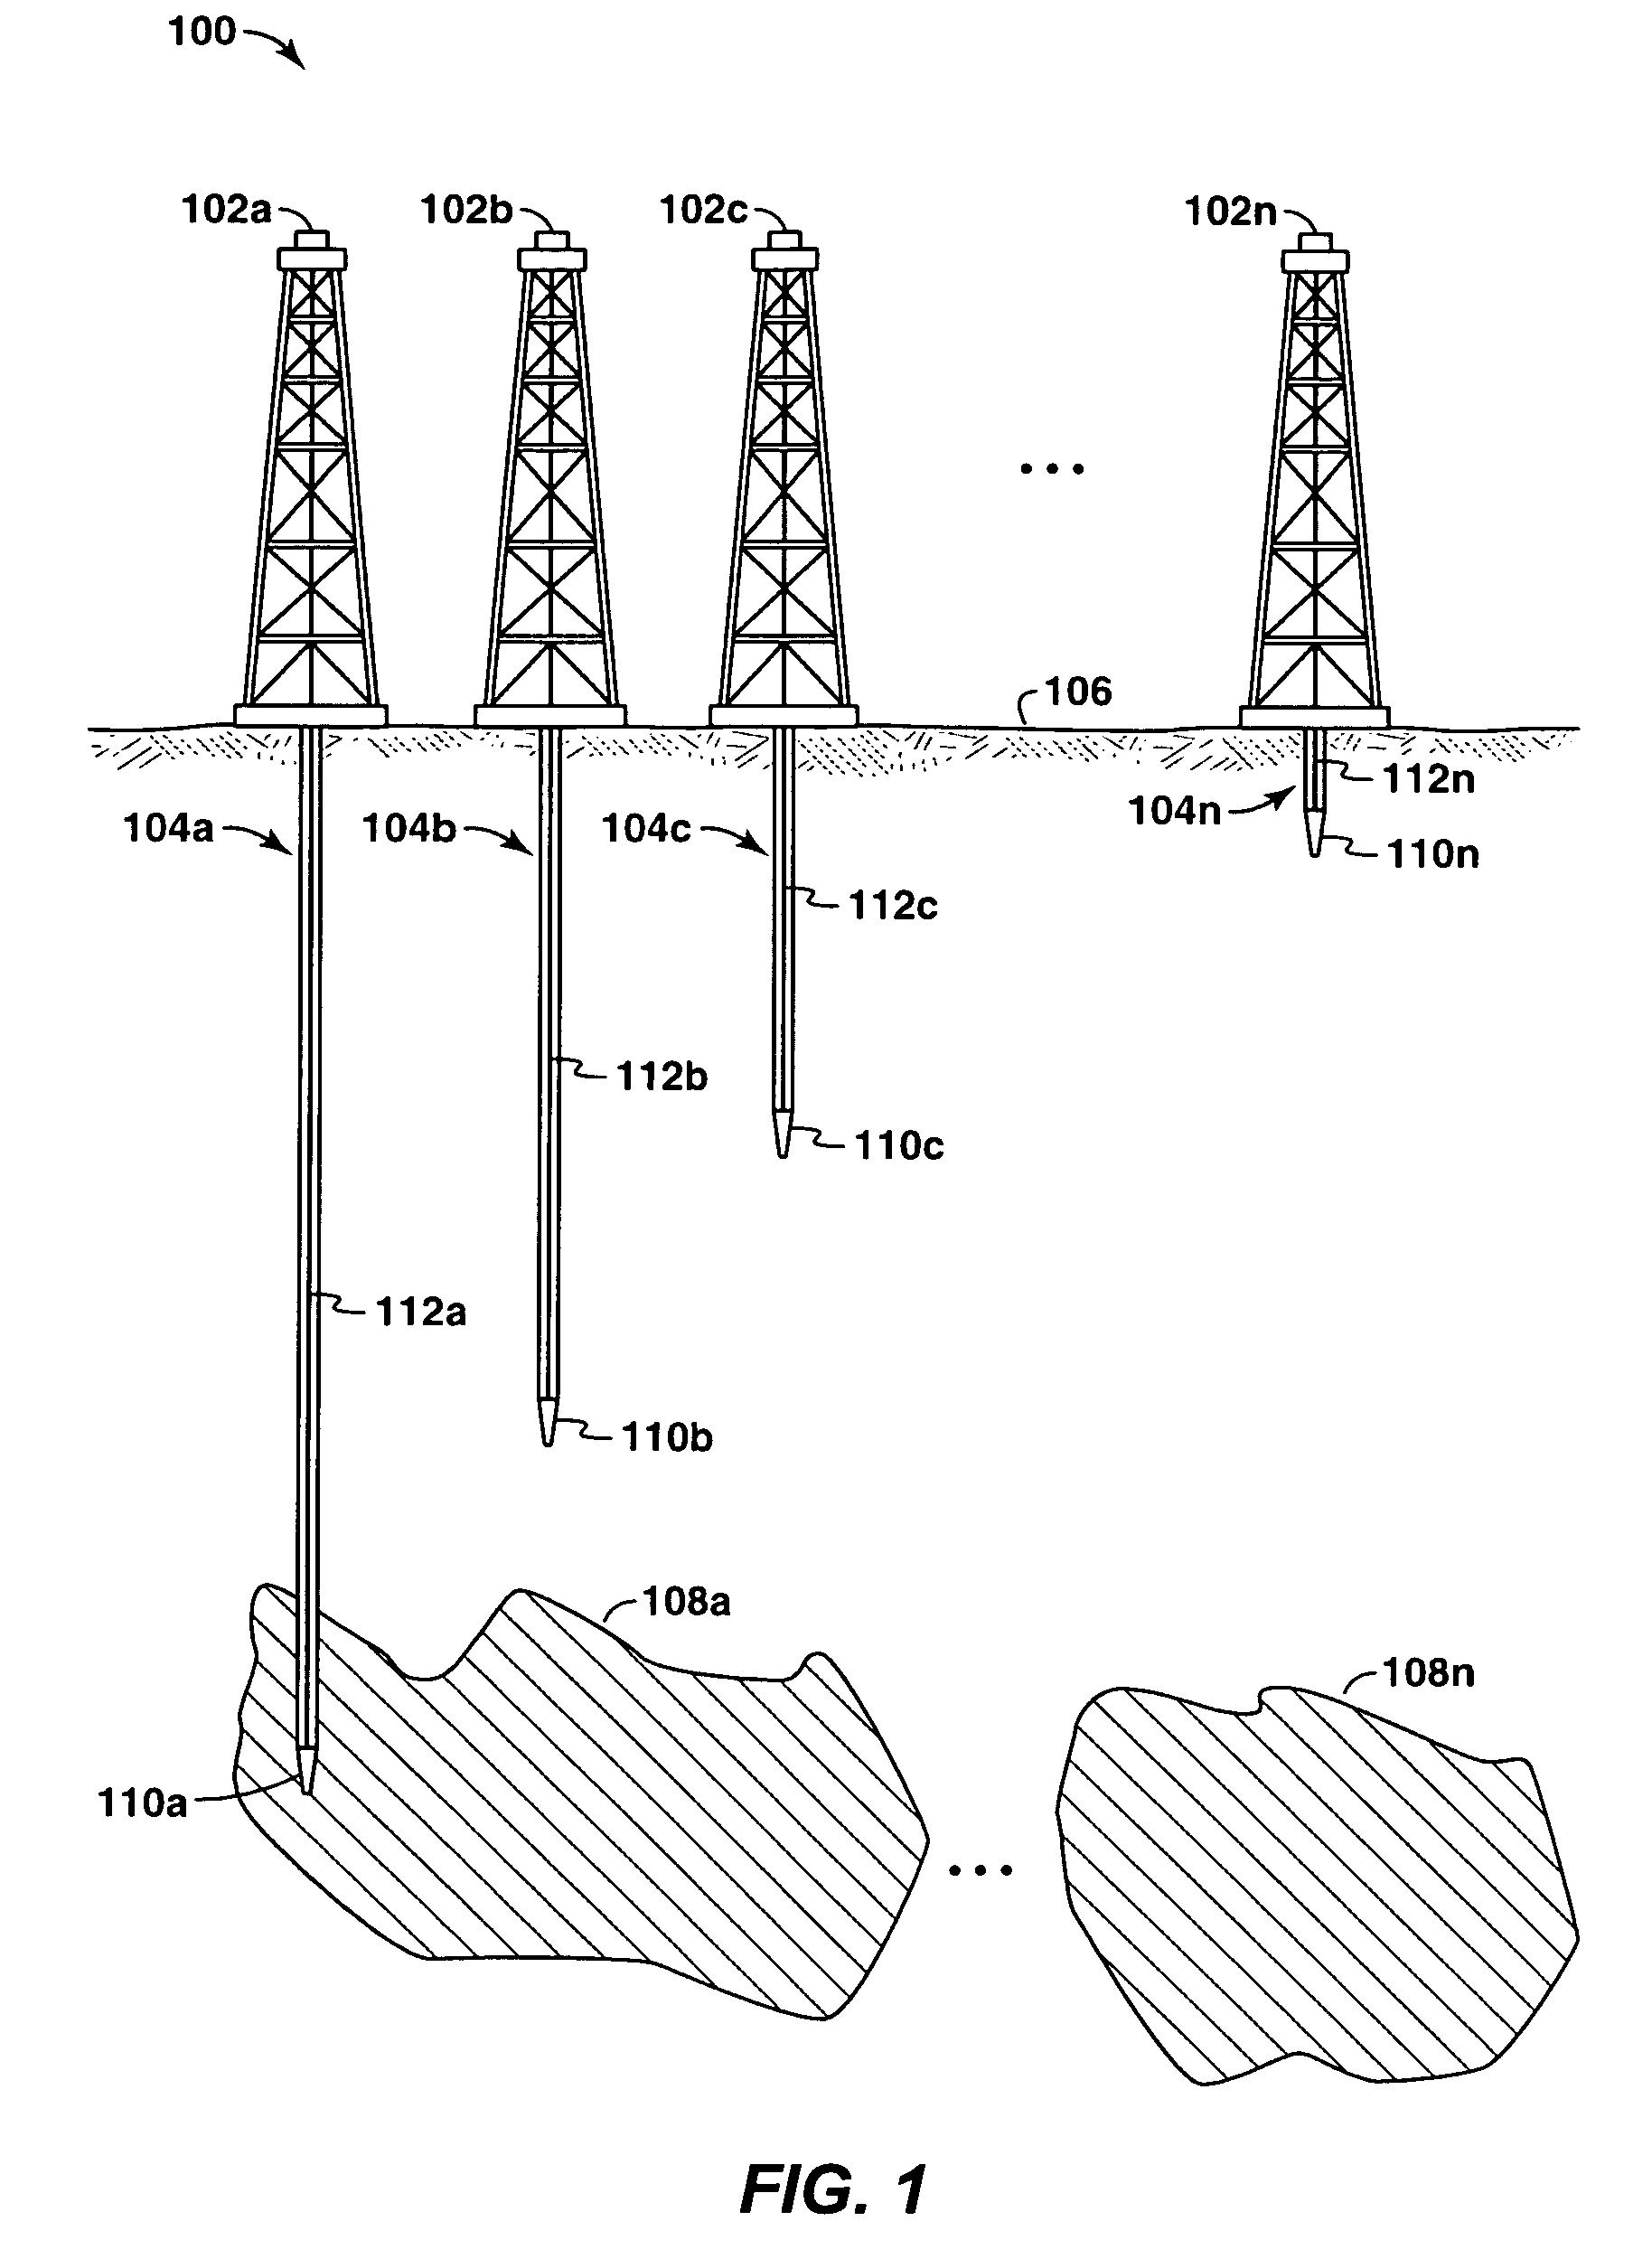 Method of drilling and production hydrocarbons from subsurface formations